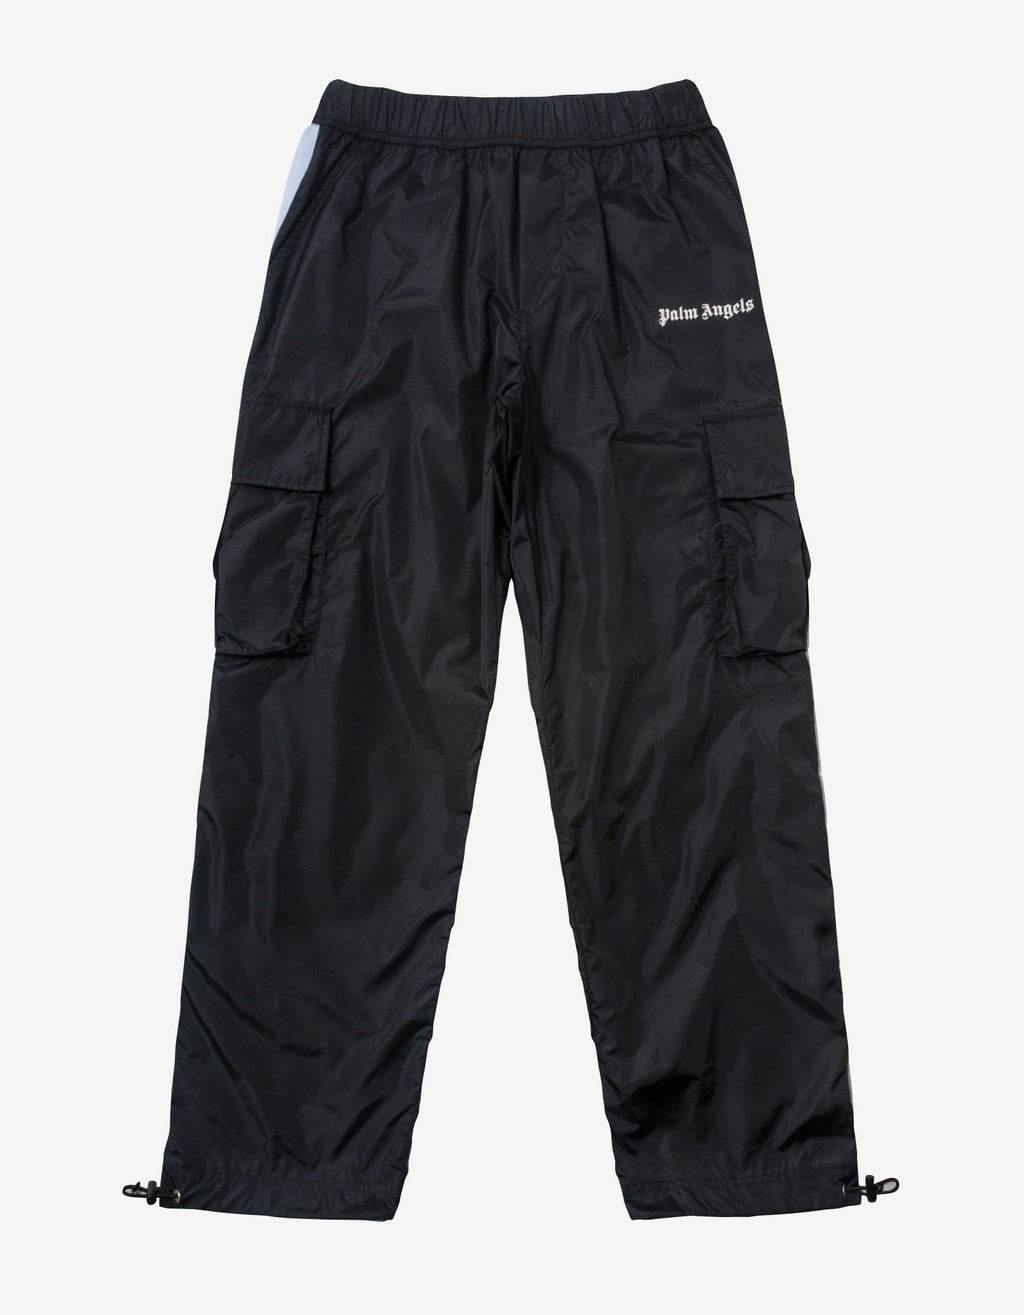 Palm Angels Palm Angels Black New Cargo Aftersport Trousers